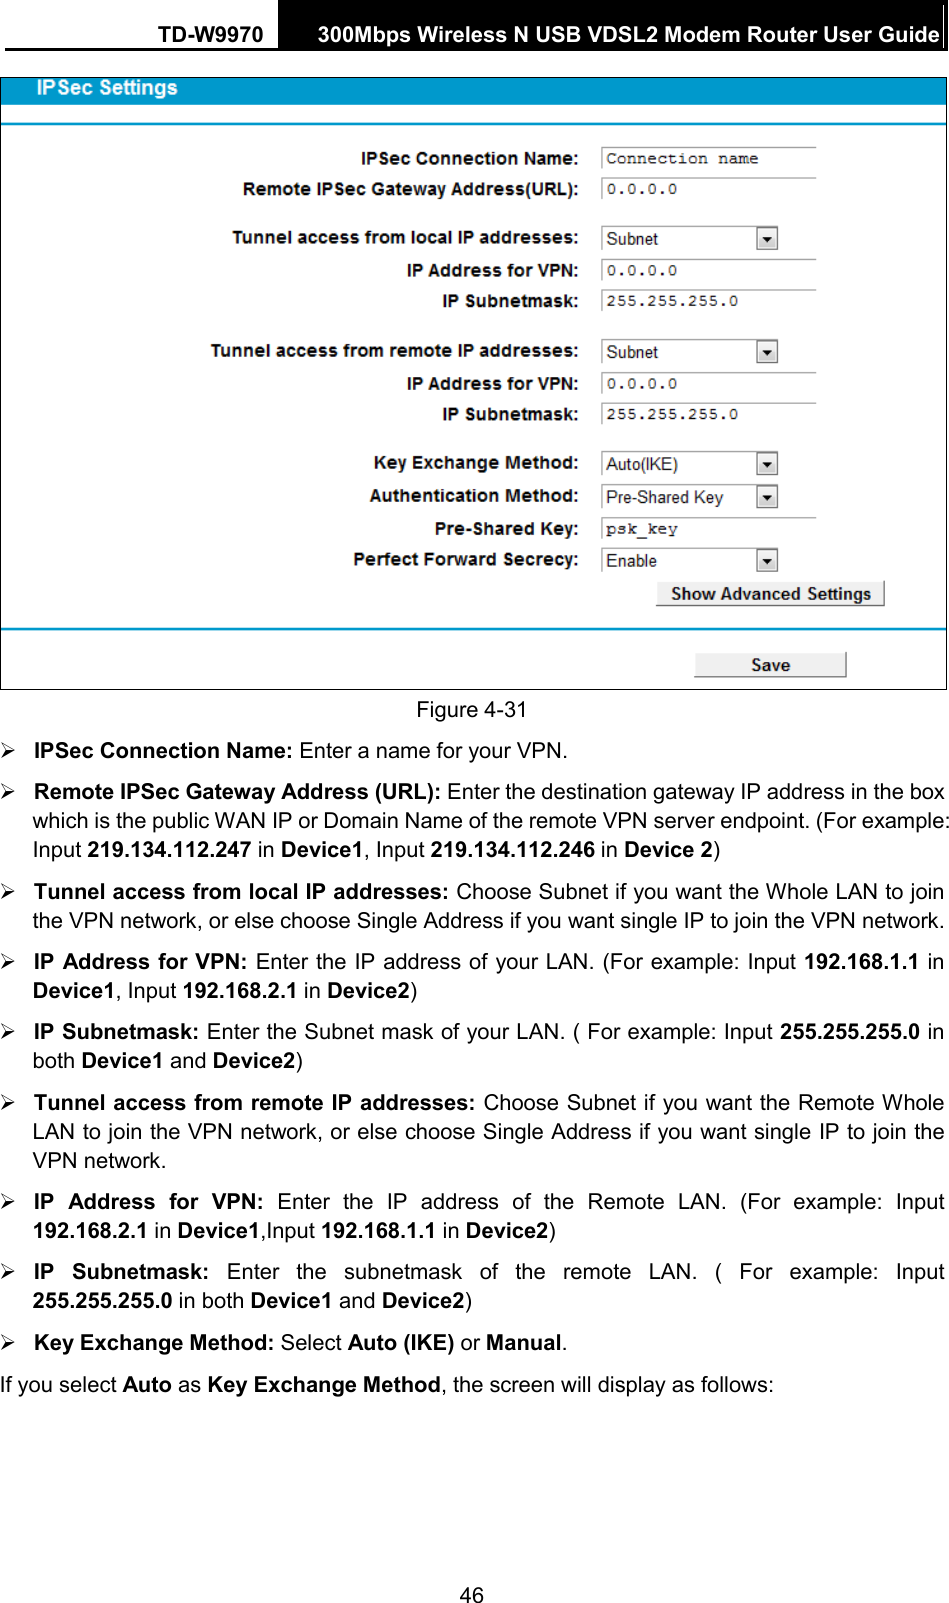 TD-W9970 300Mbps Wireless N USB VDSL2 Modem Router User Guide   Figure 4-31  IPSec Connection Name: Enter a name for your VPN.  Remote IPSec Gateway Address (URL): Enter the destination gateway IP address in the box which is the public WAN IP or Domain Name of the remote VPN server endpoint. (For example: Input 219.134.112.247 in Device1, Input 219.134.112.246 in Device 2)  Tunnel access from local IP addresses: Choose Subnet if you want the Whole LAN to join the VPN network, or else choose Single Address if you want single IP to join the VPN network.  IP Address for VPN: Enter the IP address of your LAN. (For example: Input 192.168.1.1 in Device1, Input 192.168.2.1 in Device2)  IP Subnetmask: Enter the Subnet mask of your LAN. ( For example: Input 255.255.255.0 in both Device1 and Device2)  Tunnel access from remote IP addresses: Choose Subnet if you want the Remote Whole LAN to join the VPN network, or else choose Single Address if you want single IP to join the VPN network.  IP Address for VPN: Enter the IP address of the Remote LAN. (For example: Input 192.168.2.1 in Device1,Input 192.168.1.1 in Device2)  IP Subnetmask: Enter the subnetmask of the remote LAN. ( For example: Input 255.255.255.0 in both Device1 and Device2)  Key Exchange Method: Select Auto (IKE) or Manual. If you select Auto as Key Exchange Method, the screen will display as follows: 46 